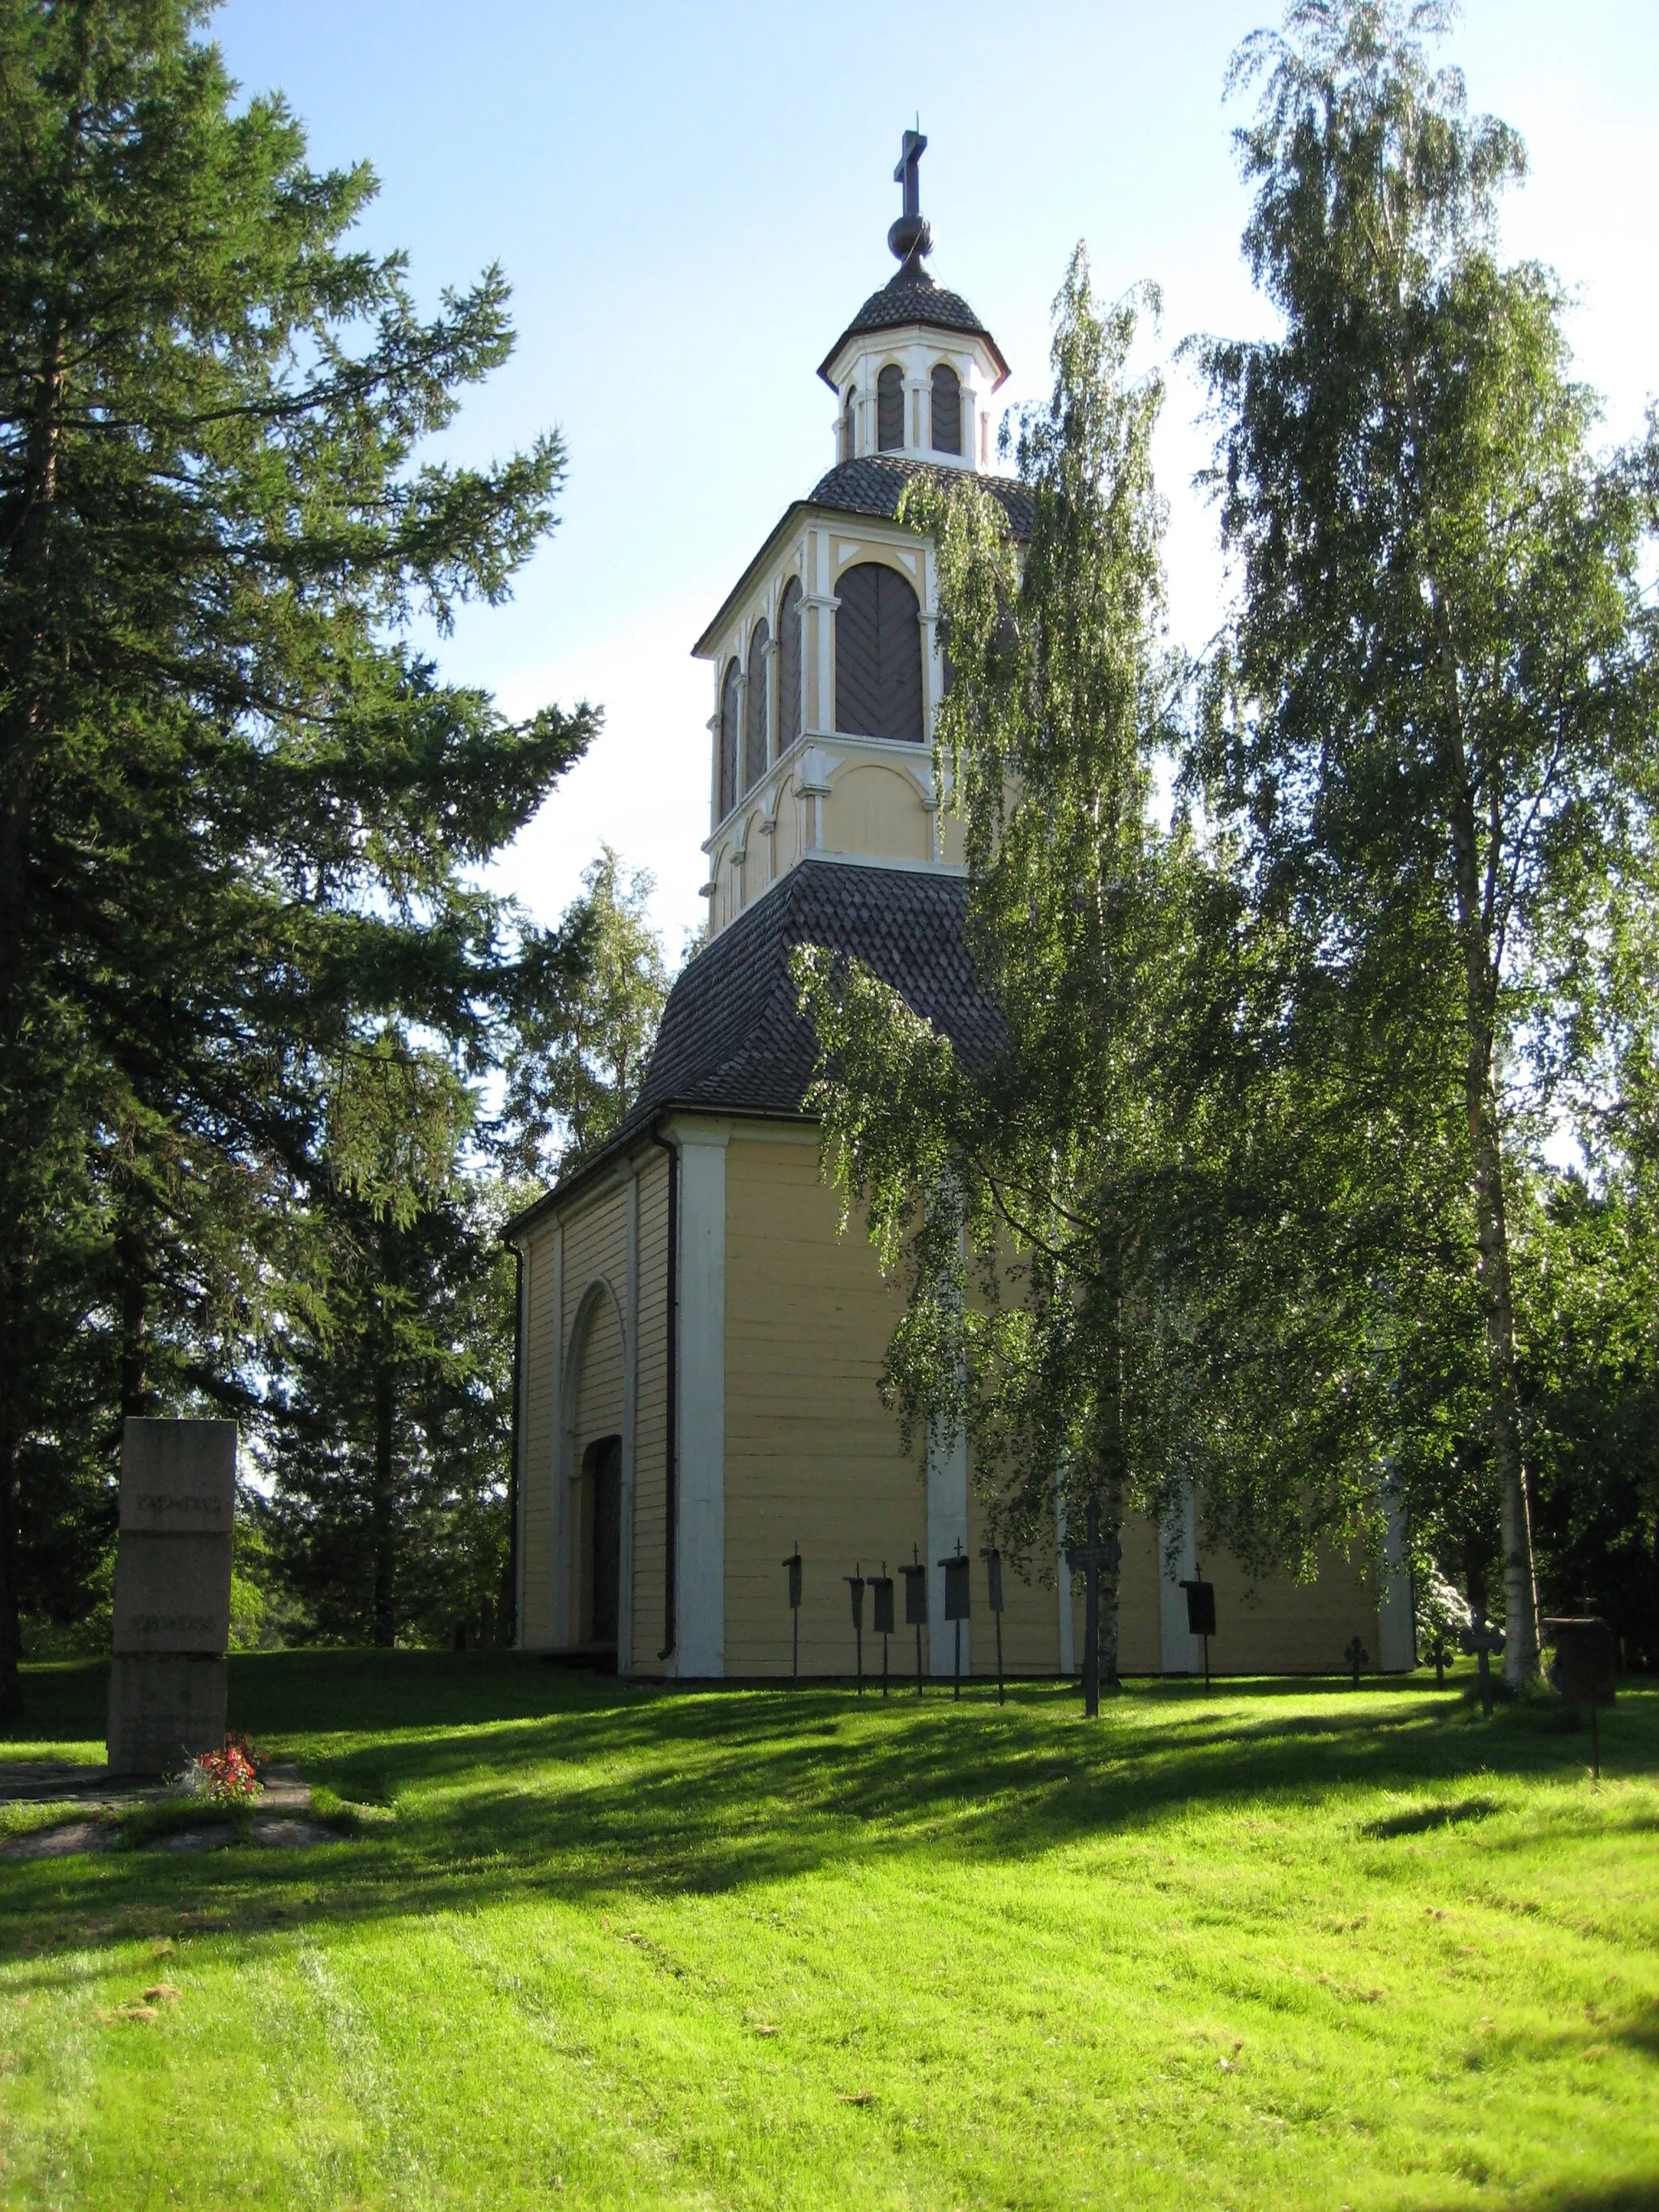 Photo showing: Belfry of the Liminka church, located in Liminka, Finland, seen from north. The belfry has been built by Grels Norling in 1733. Some tombs of the Liminka old cemetery can also be seen.